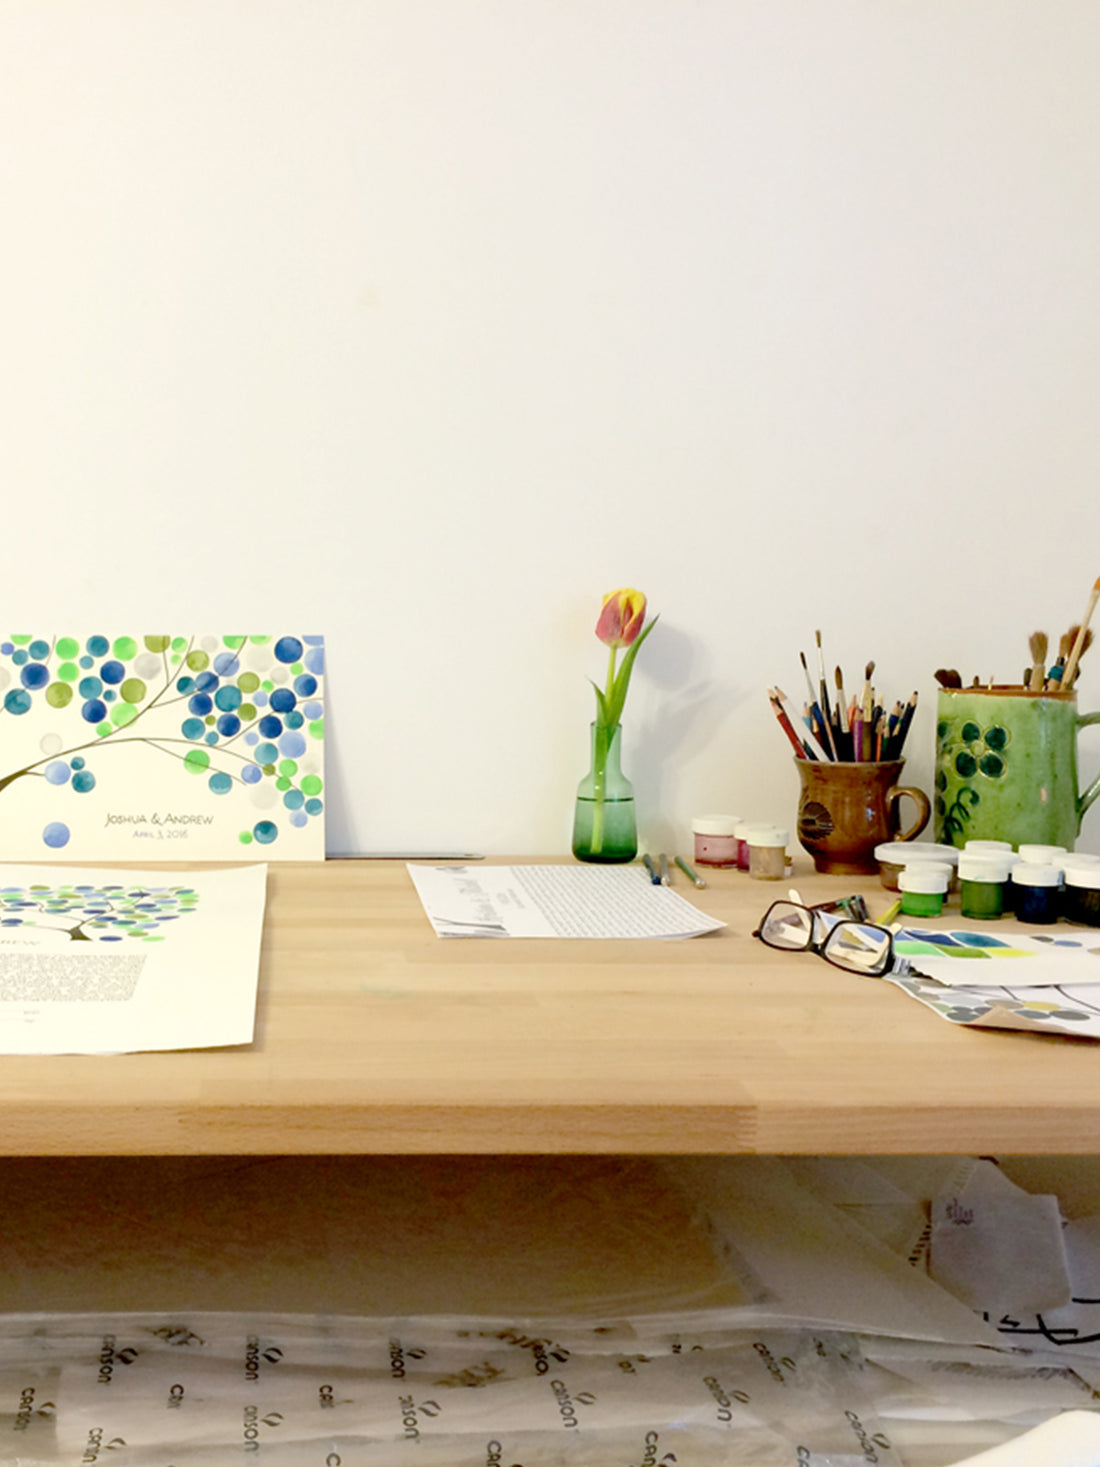 Makings of a matching guest book and ketubah - original greenery in watercolor